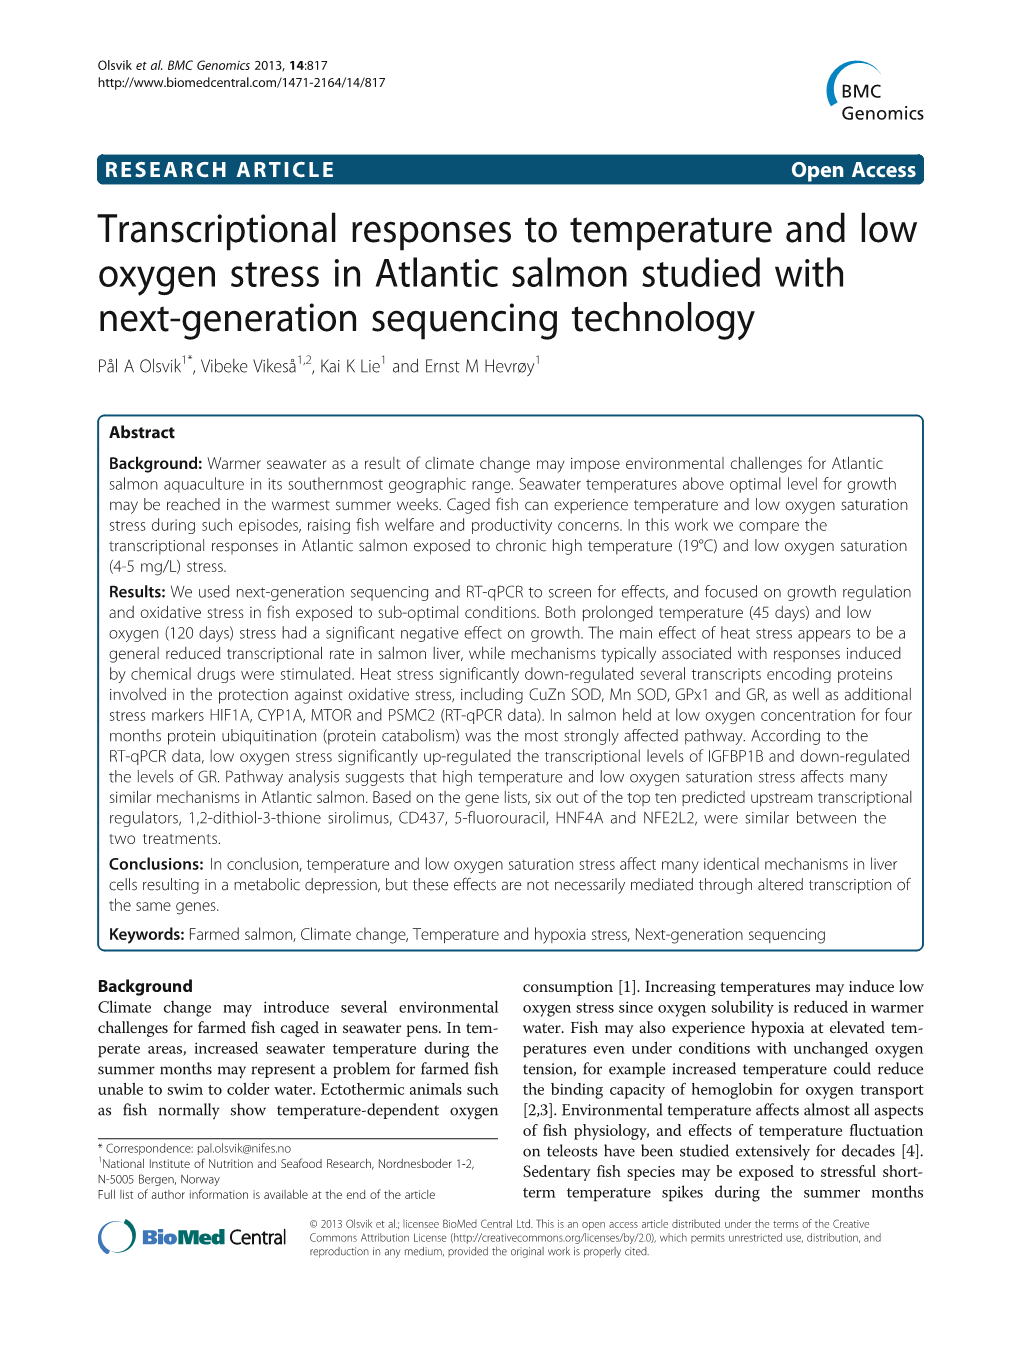 Transcriptional Responses to Temperature and Low